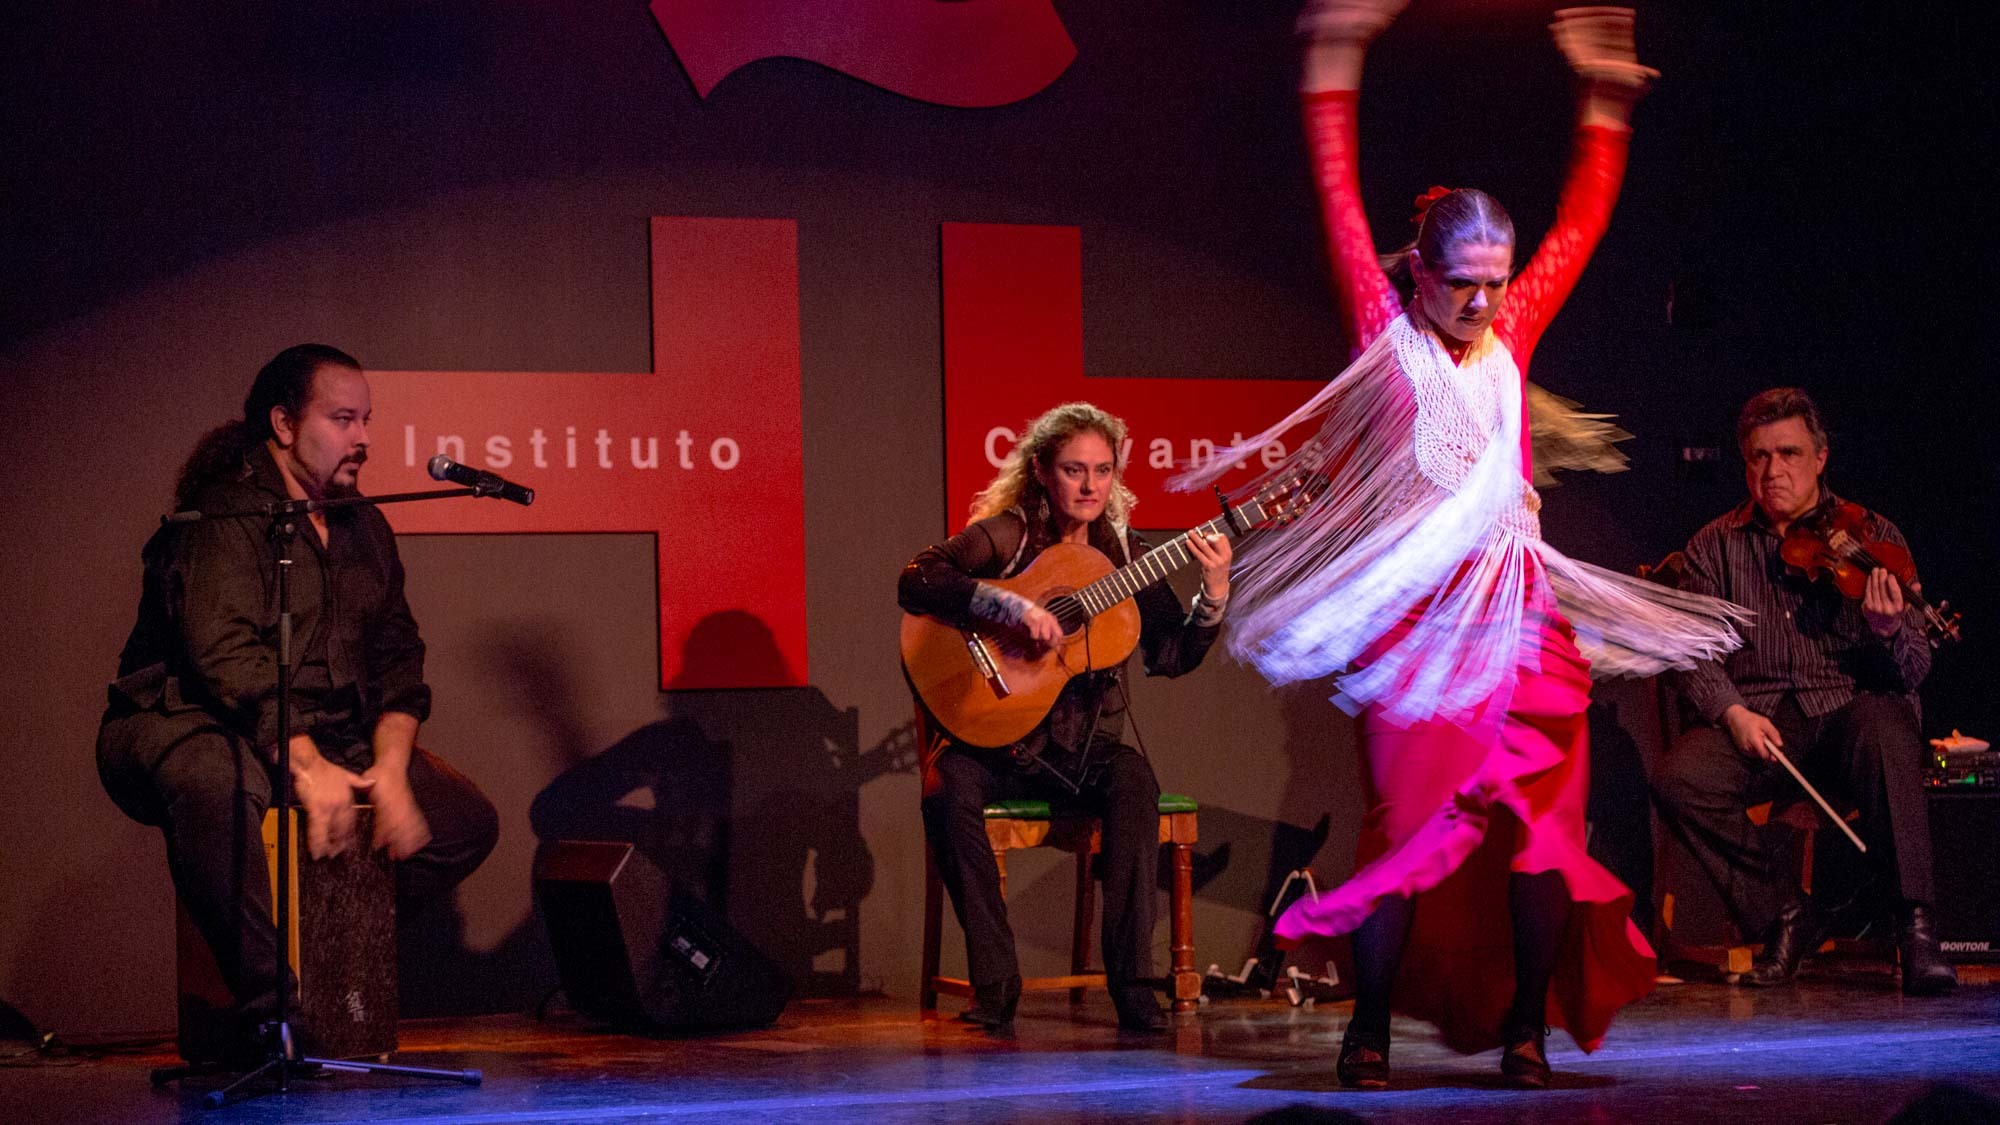 Greetings from Flamenco Dancer Wendy Clinard lead image